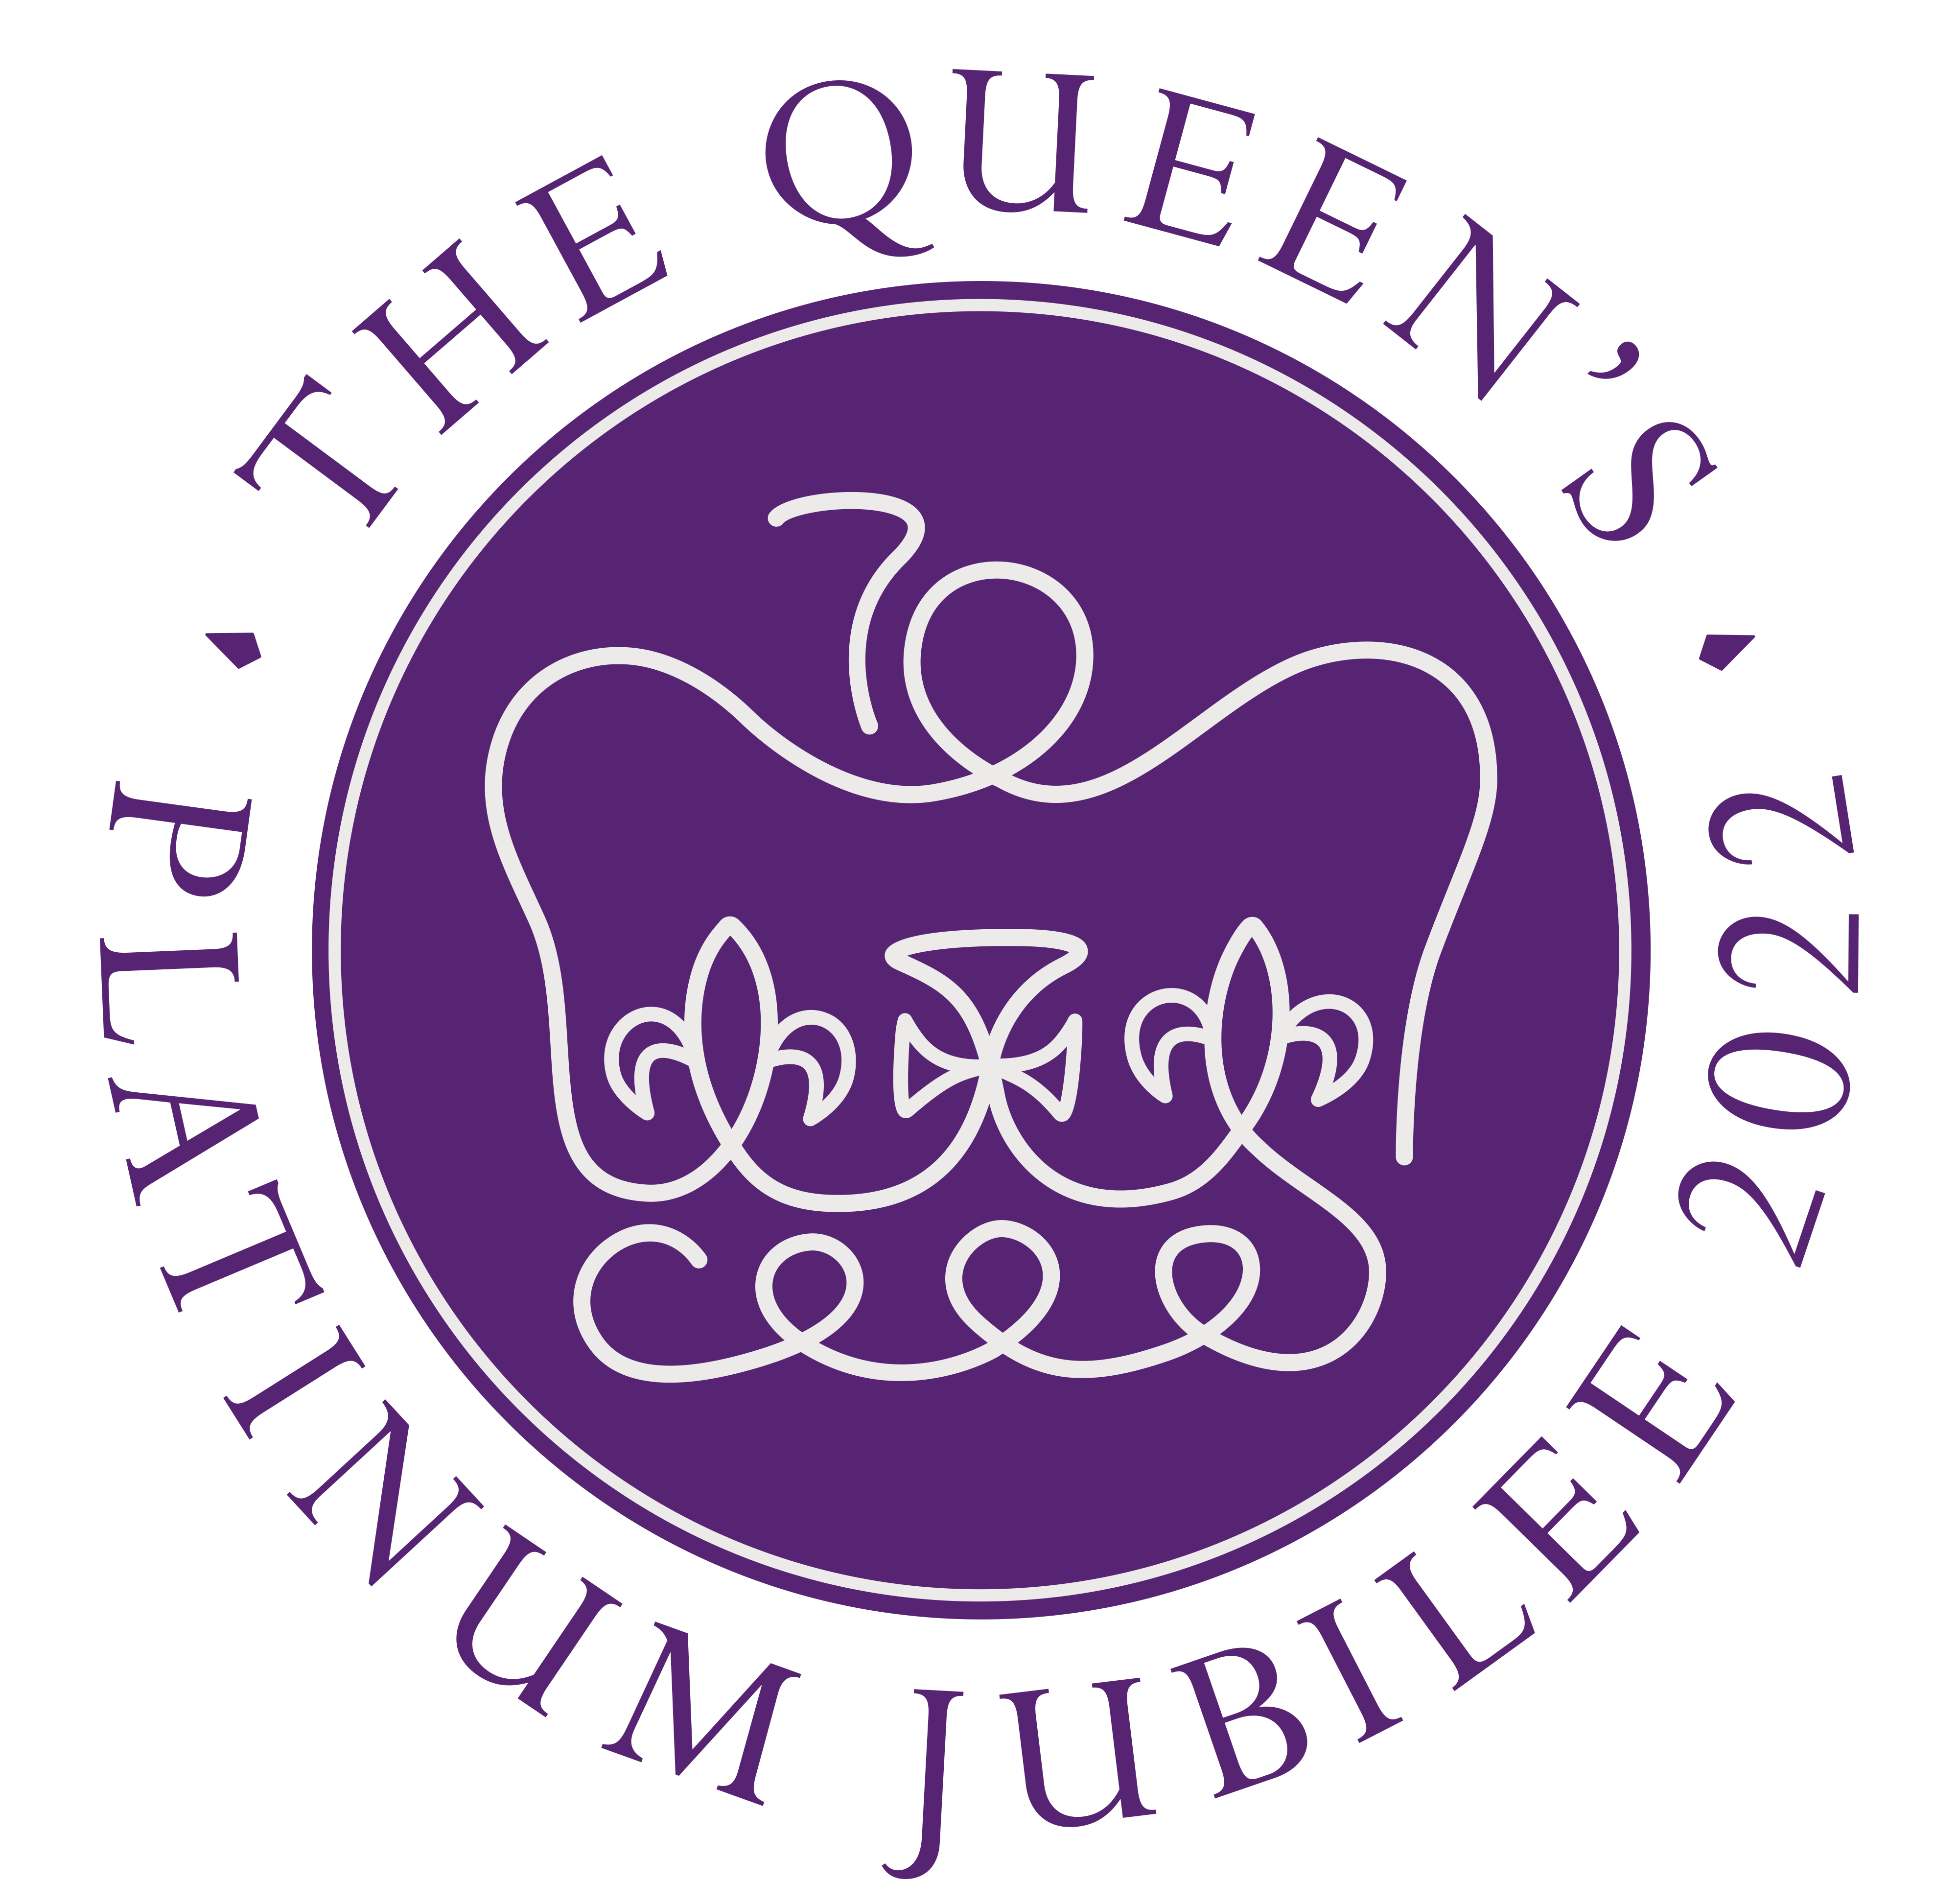 A purple circle bears the outline of a crown. Words around the edge read The Queen's Platinum Jubilee 2022